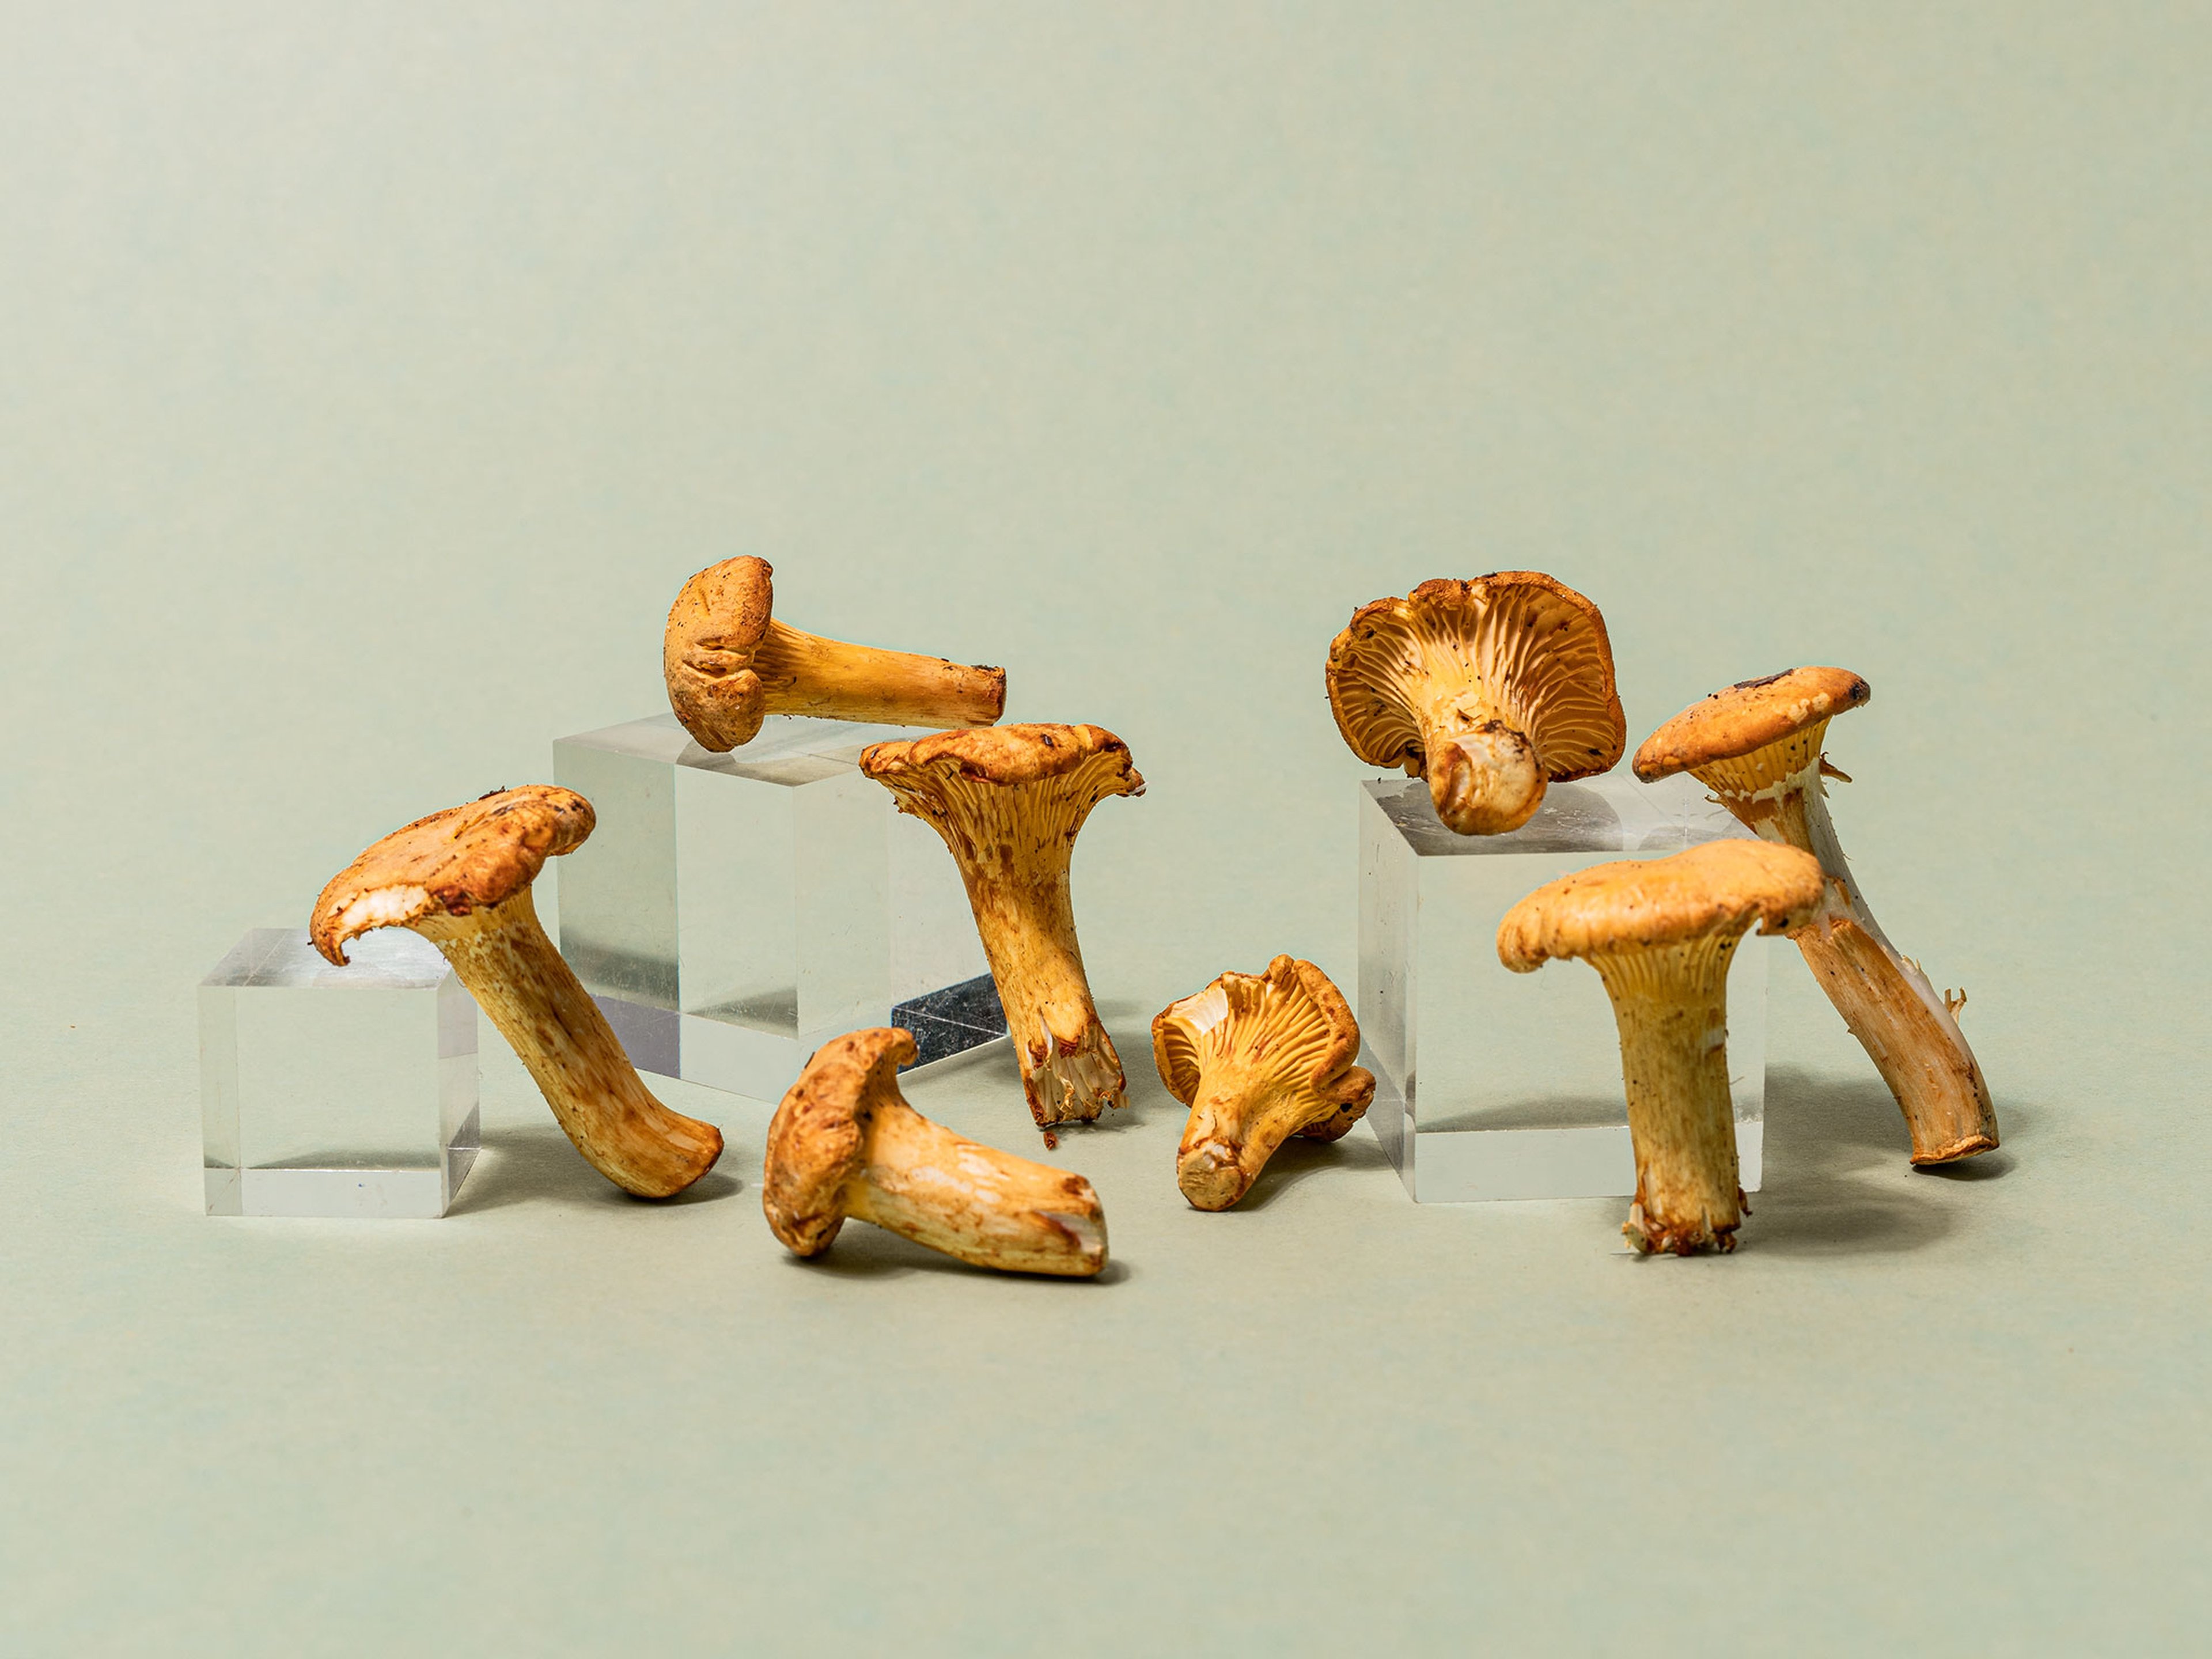 Everything You Need to Know About Shopping for, Storing, and Preparing In Season Chanterelle Mushrooms